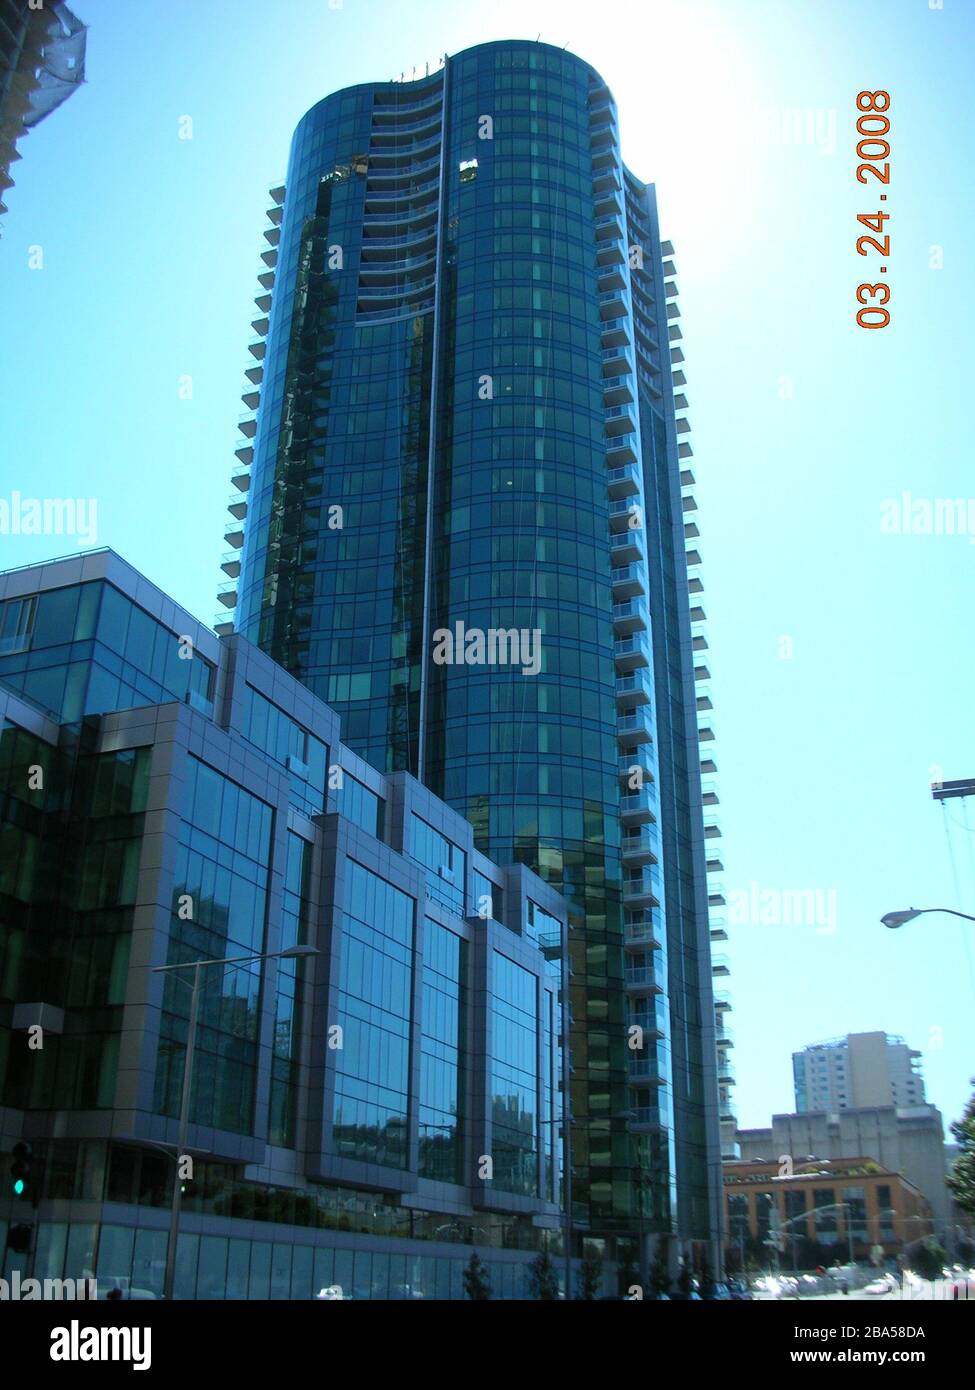 'English: The Infinity (300 Spear Street) complex, with tower II completed in the center, and the Spear Street midrise on the bottom left. The under construction tower I is seen on the upper left. The 22-story Metropolitan II is in the background on the bottom right. San Francisco, California, USA.; 24 March 2008; Own work (Original caption:  I created this work entirely by myself.) Transferred from en.wikipedia to Commons by User:Magnus Manske using CommonsHelper.; Hydrogen Iodide at en.wikipedia; ' Stock Photo